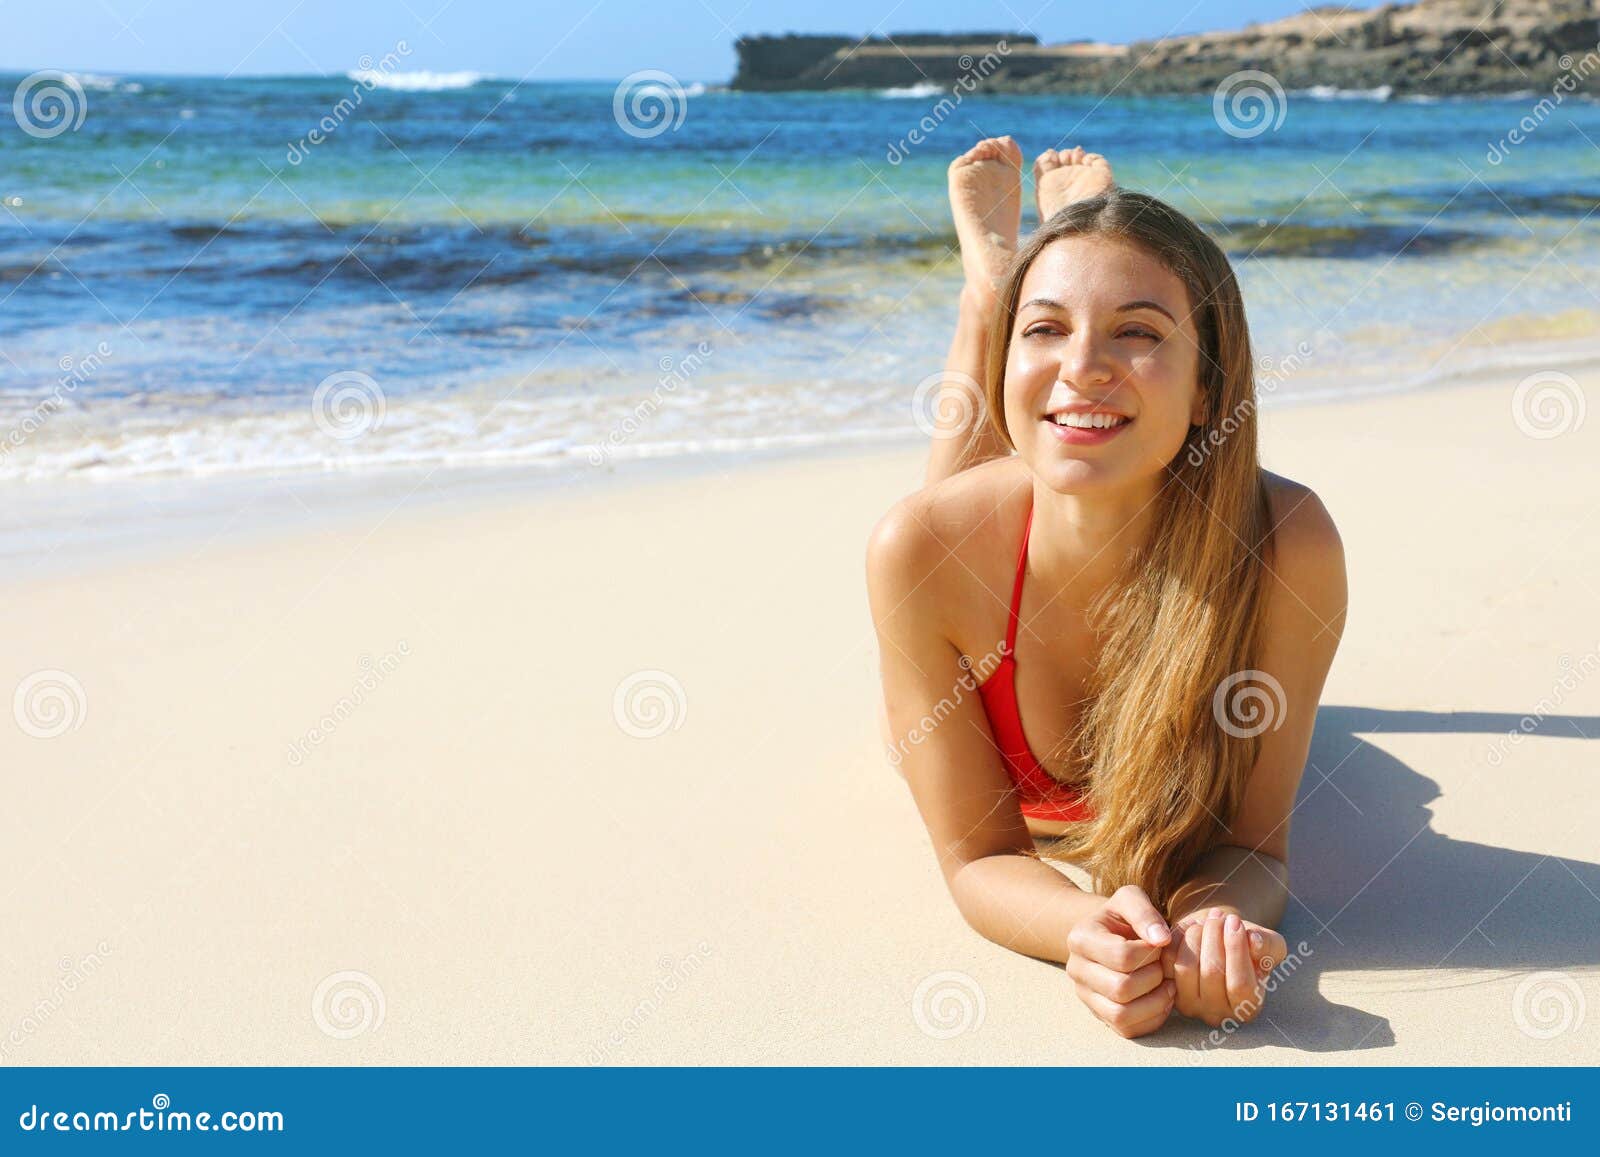 Canaria Nude Beach Handjob - Happy Beautiful Smiling Woman Enjoying Relax Lying on the Beach Looking To  the Side. Summer Holidays Concept Stock Image - Image of concept, ocean:  167131461